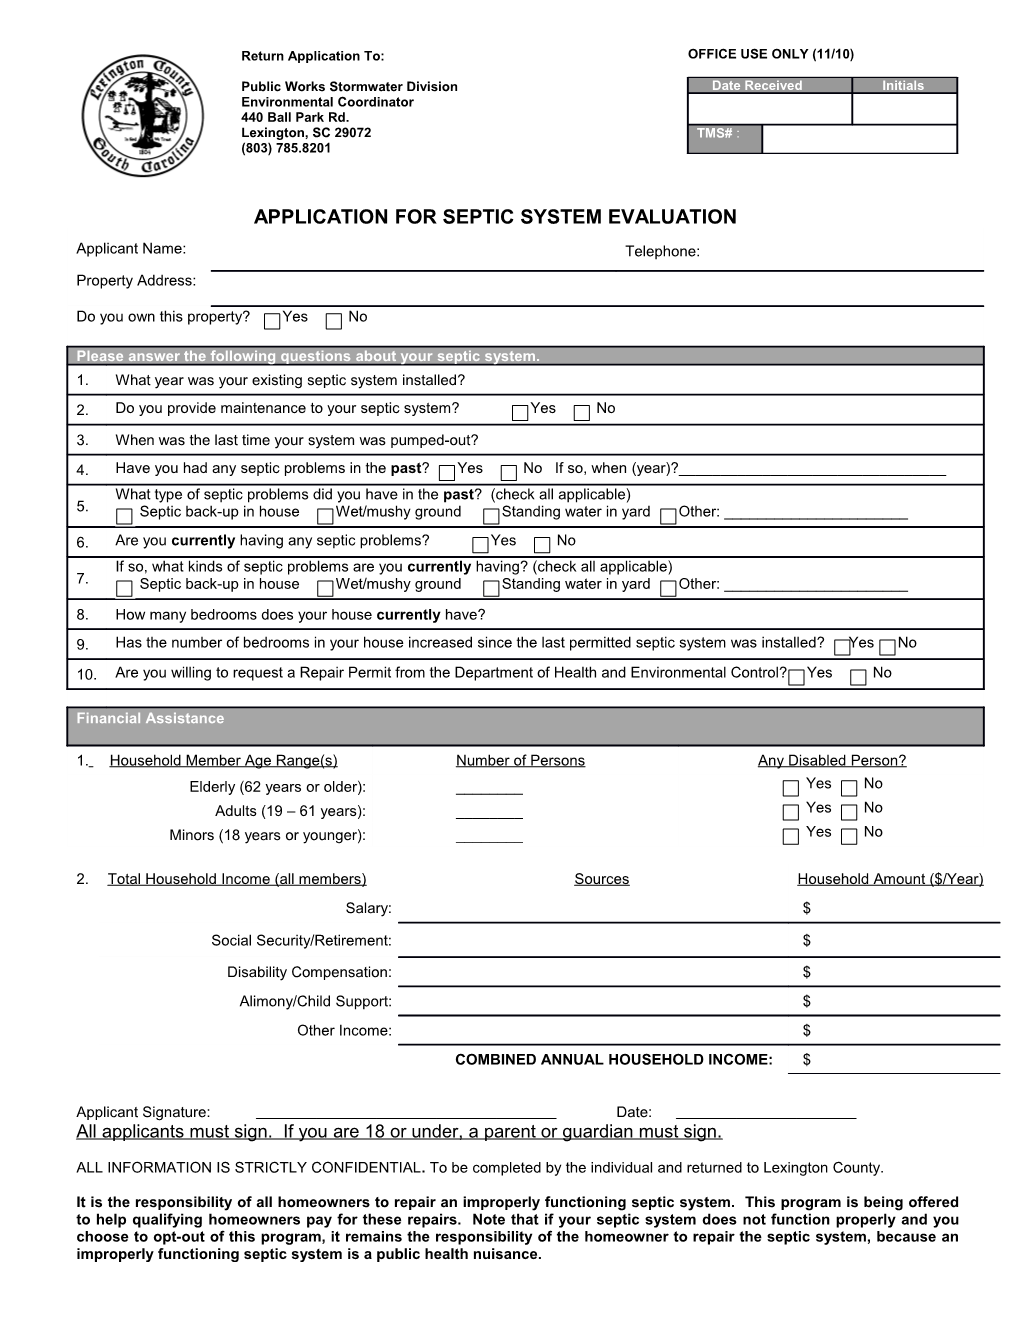 Application for Septic System Evaluation